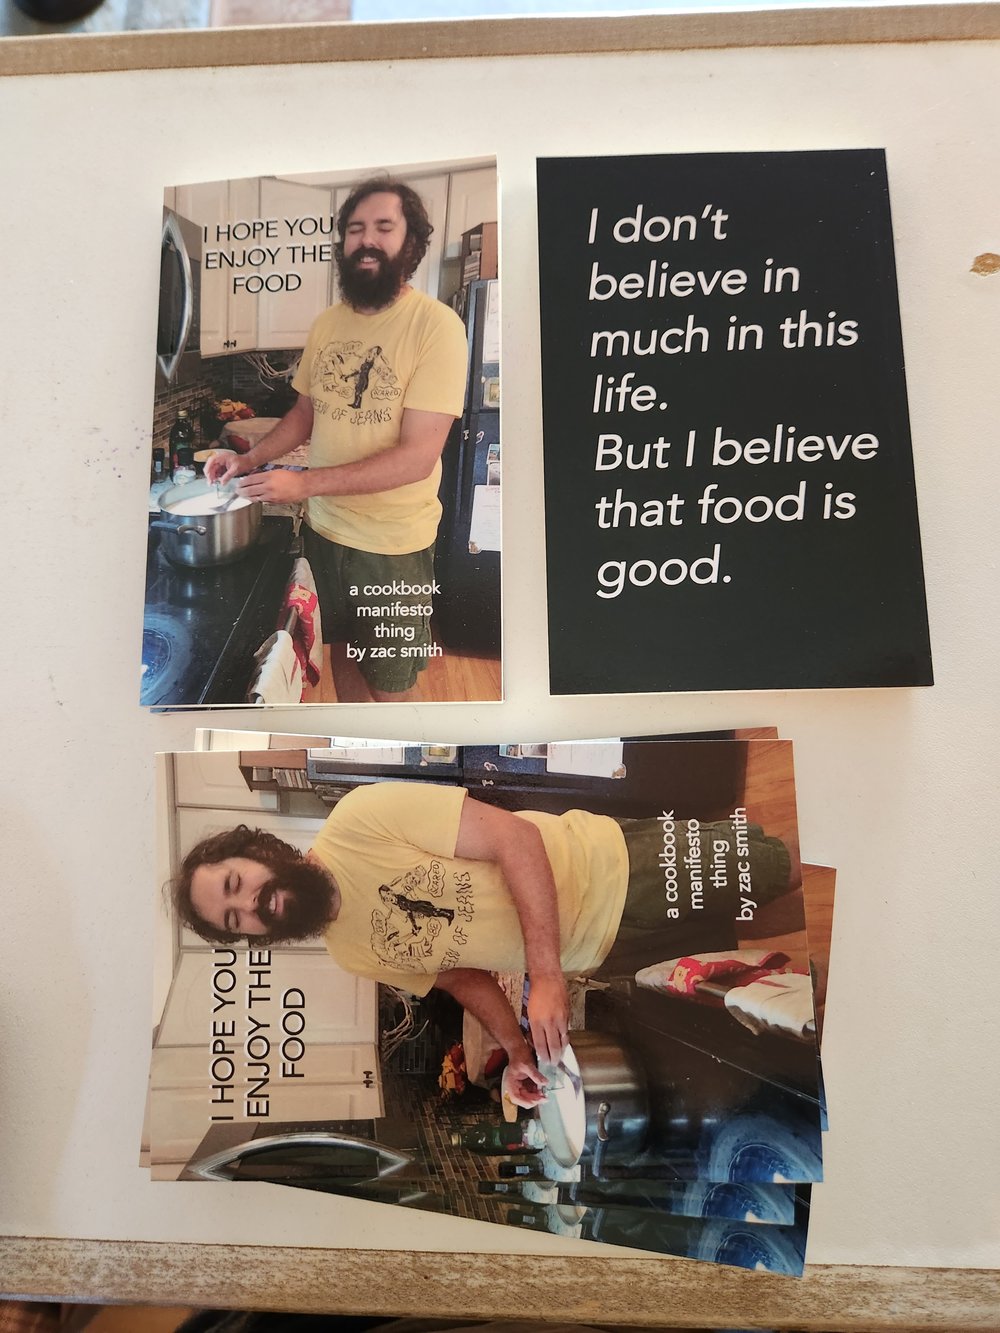 I Hope You Enjoy the Food: A Cookbook Manifesto Thing by Zac Smith